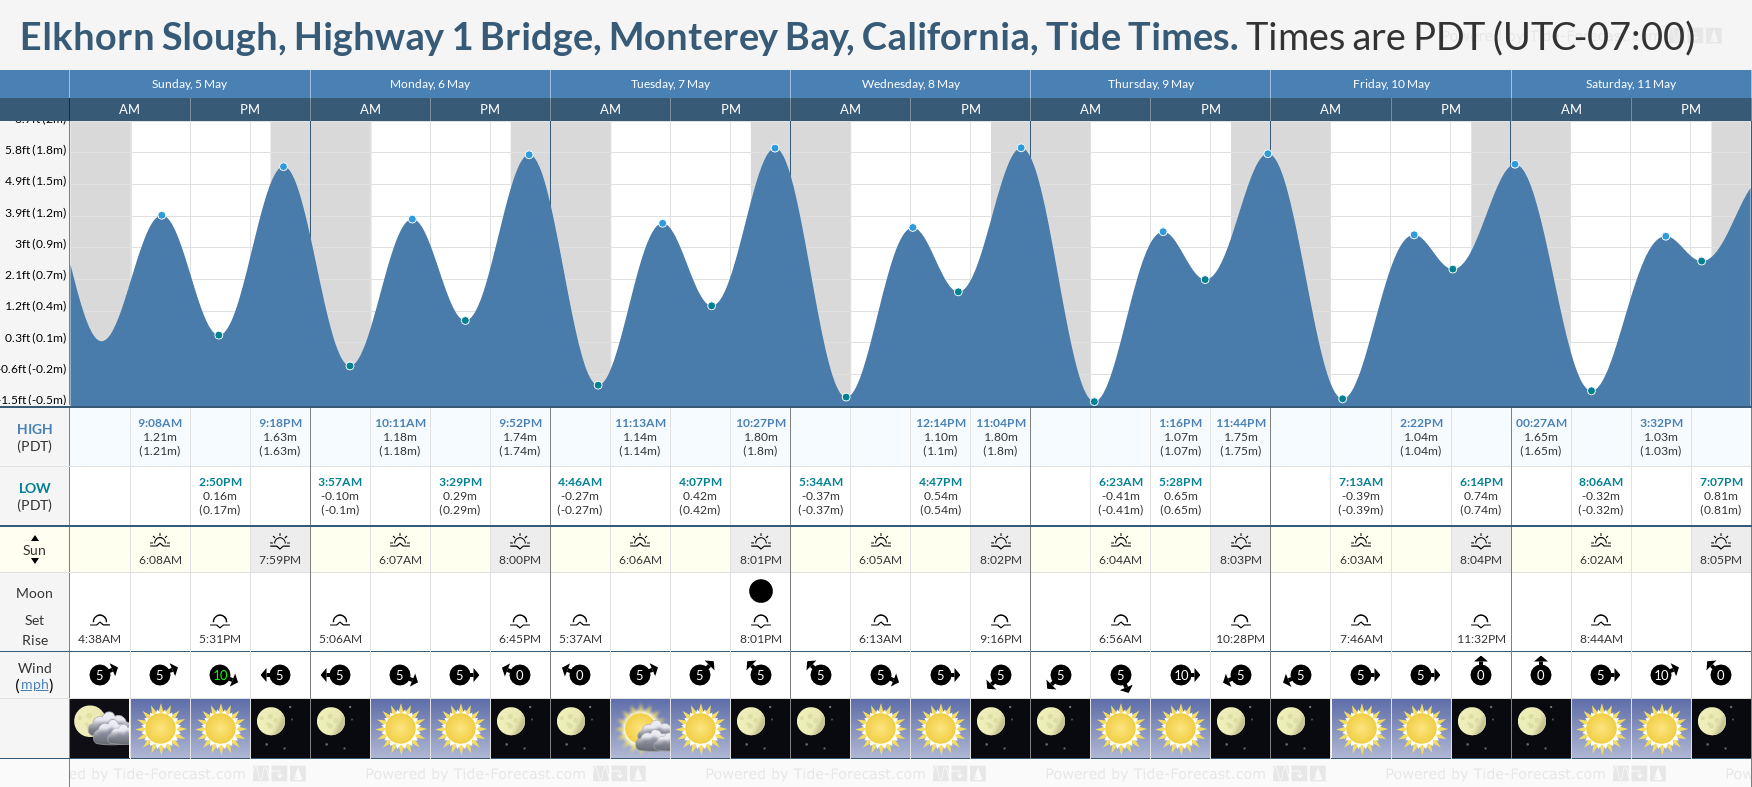 Elkhorn Slough, Highway 1 Bridge, Monterey Bay, California Tide Chart including high and low tide tide times for the next 7 days